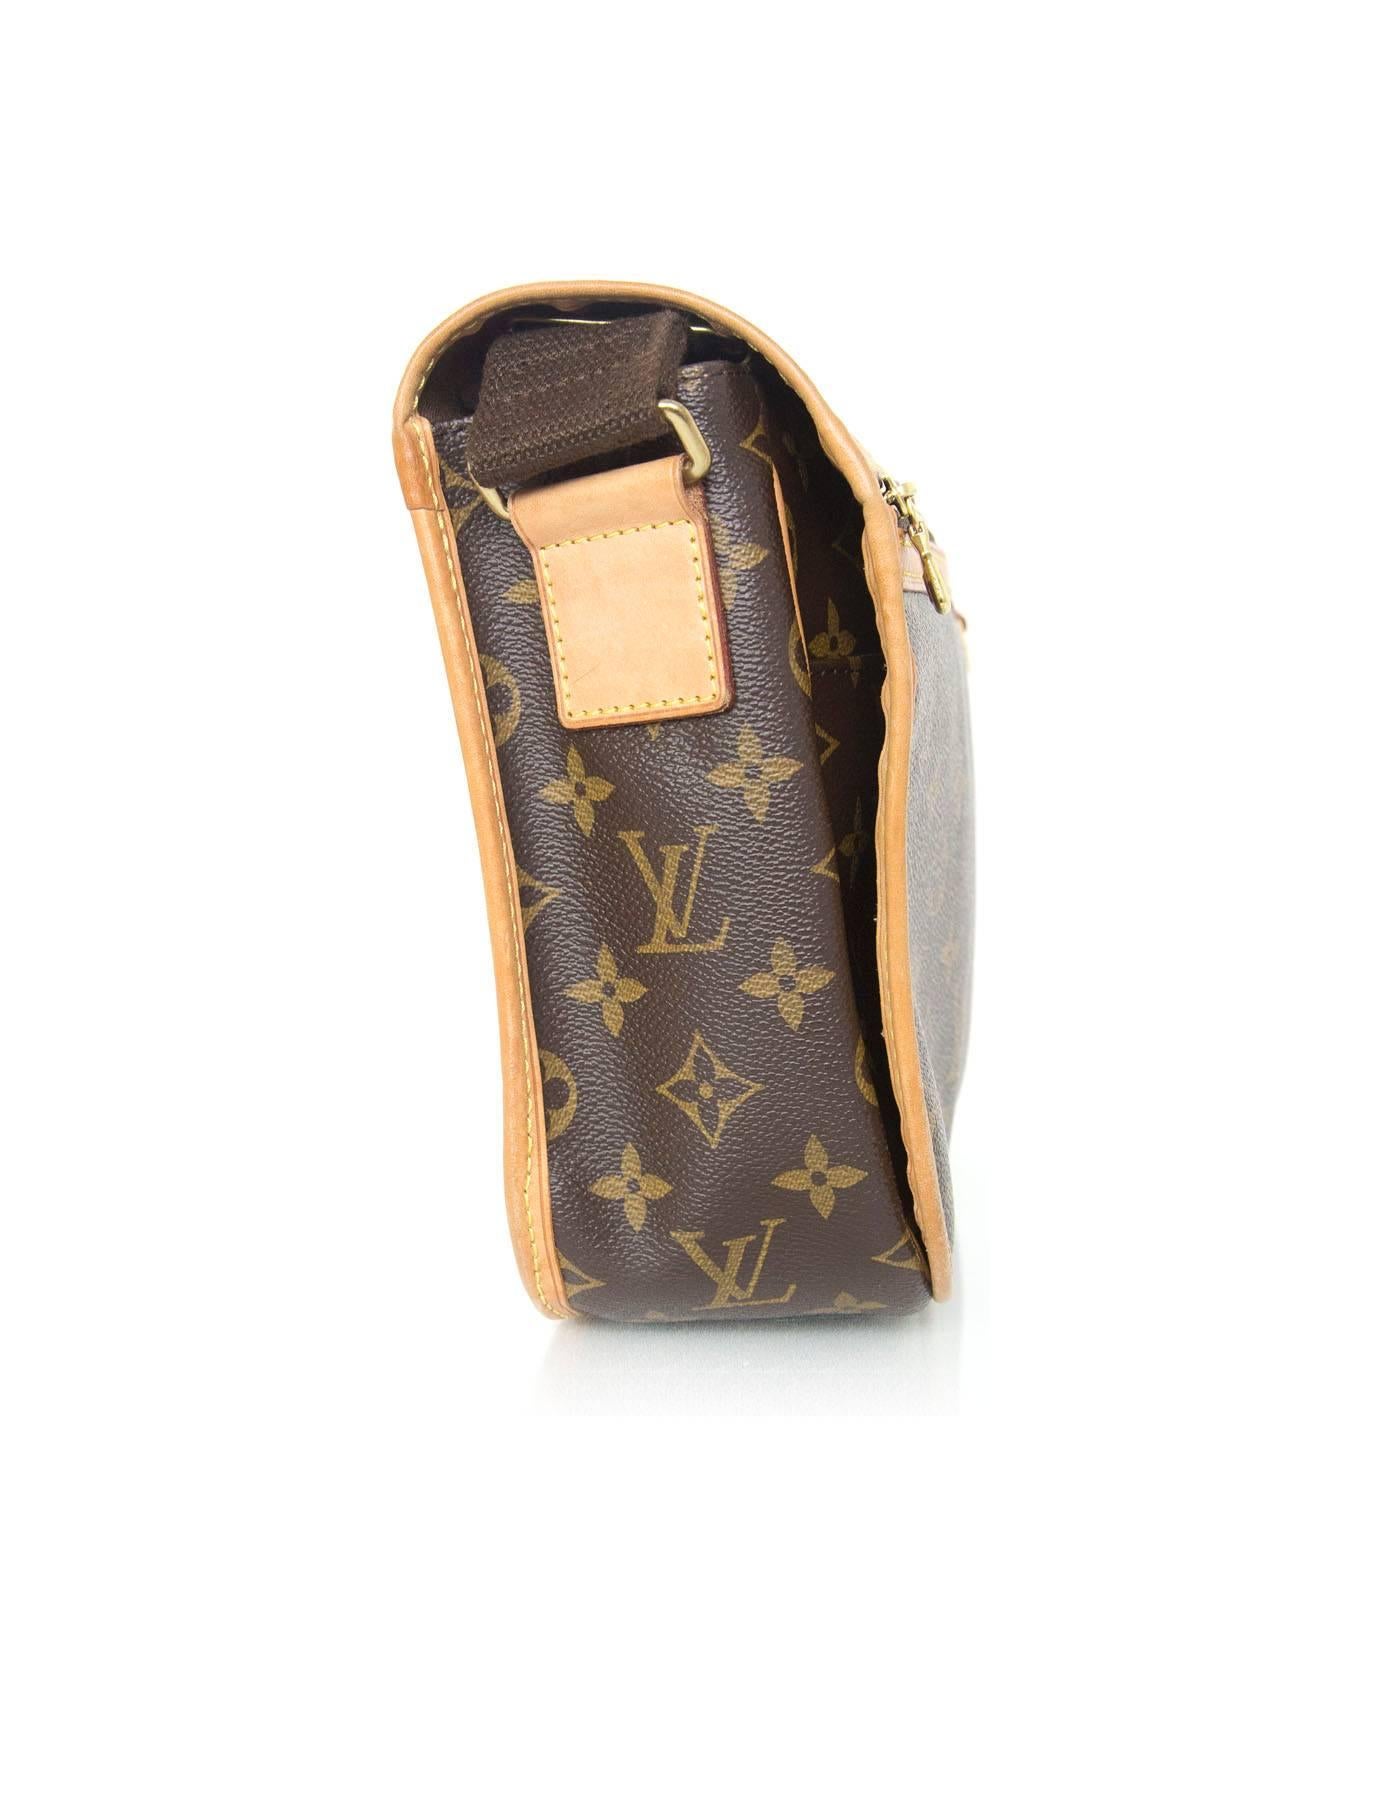 Louis Vuitton Monogram Bosphore PM Messenger Bag
Features Tan leather piping

Made In: France
Year of Production: 2009
Color: Brown and tan
Hardware: Goldtone
Materials: Leather and coated canvas
Lining: Brown canvas
Closure/Opening: Flap